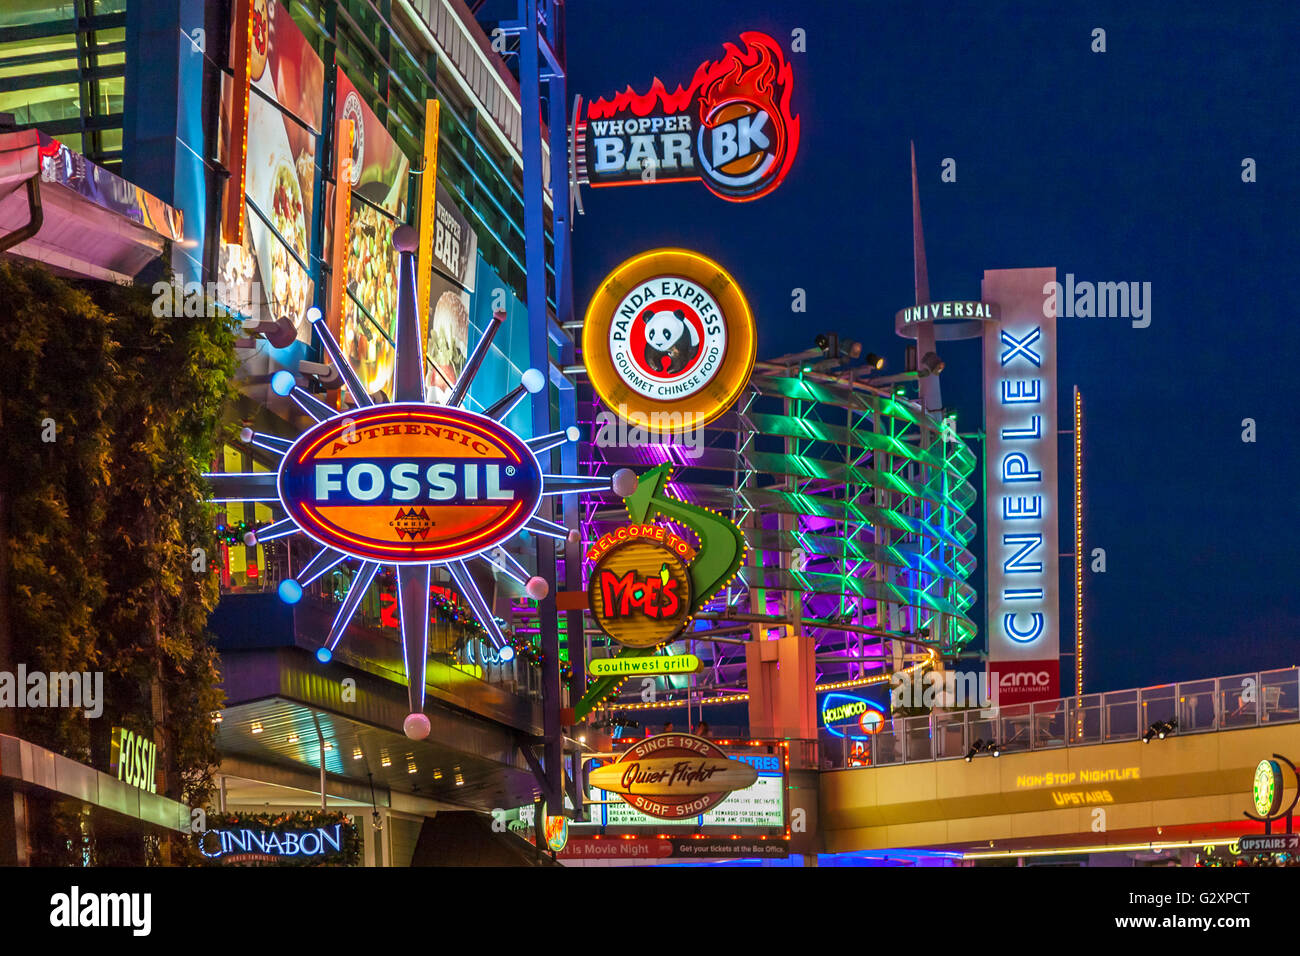 Brightly colored neon signs advertise restaurants and movie theaters at Universal Studio's City Walk in Orlando, Florida Stock Photo